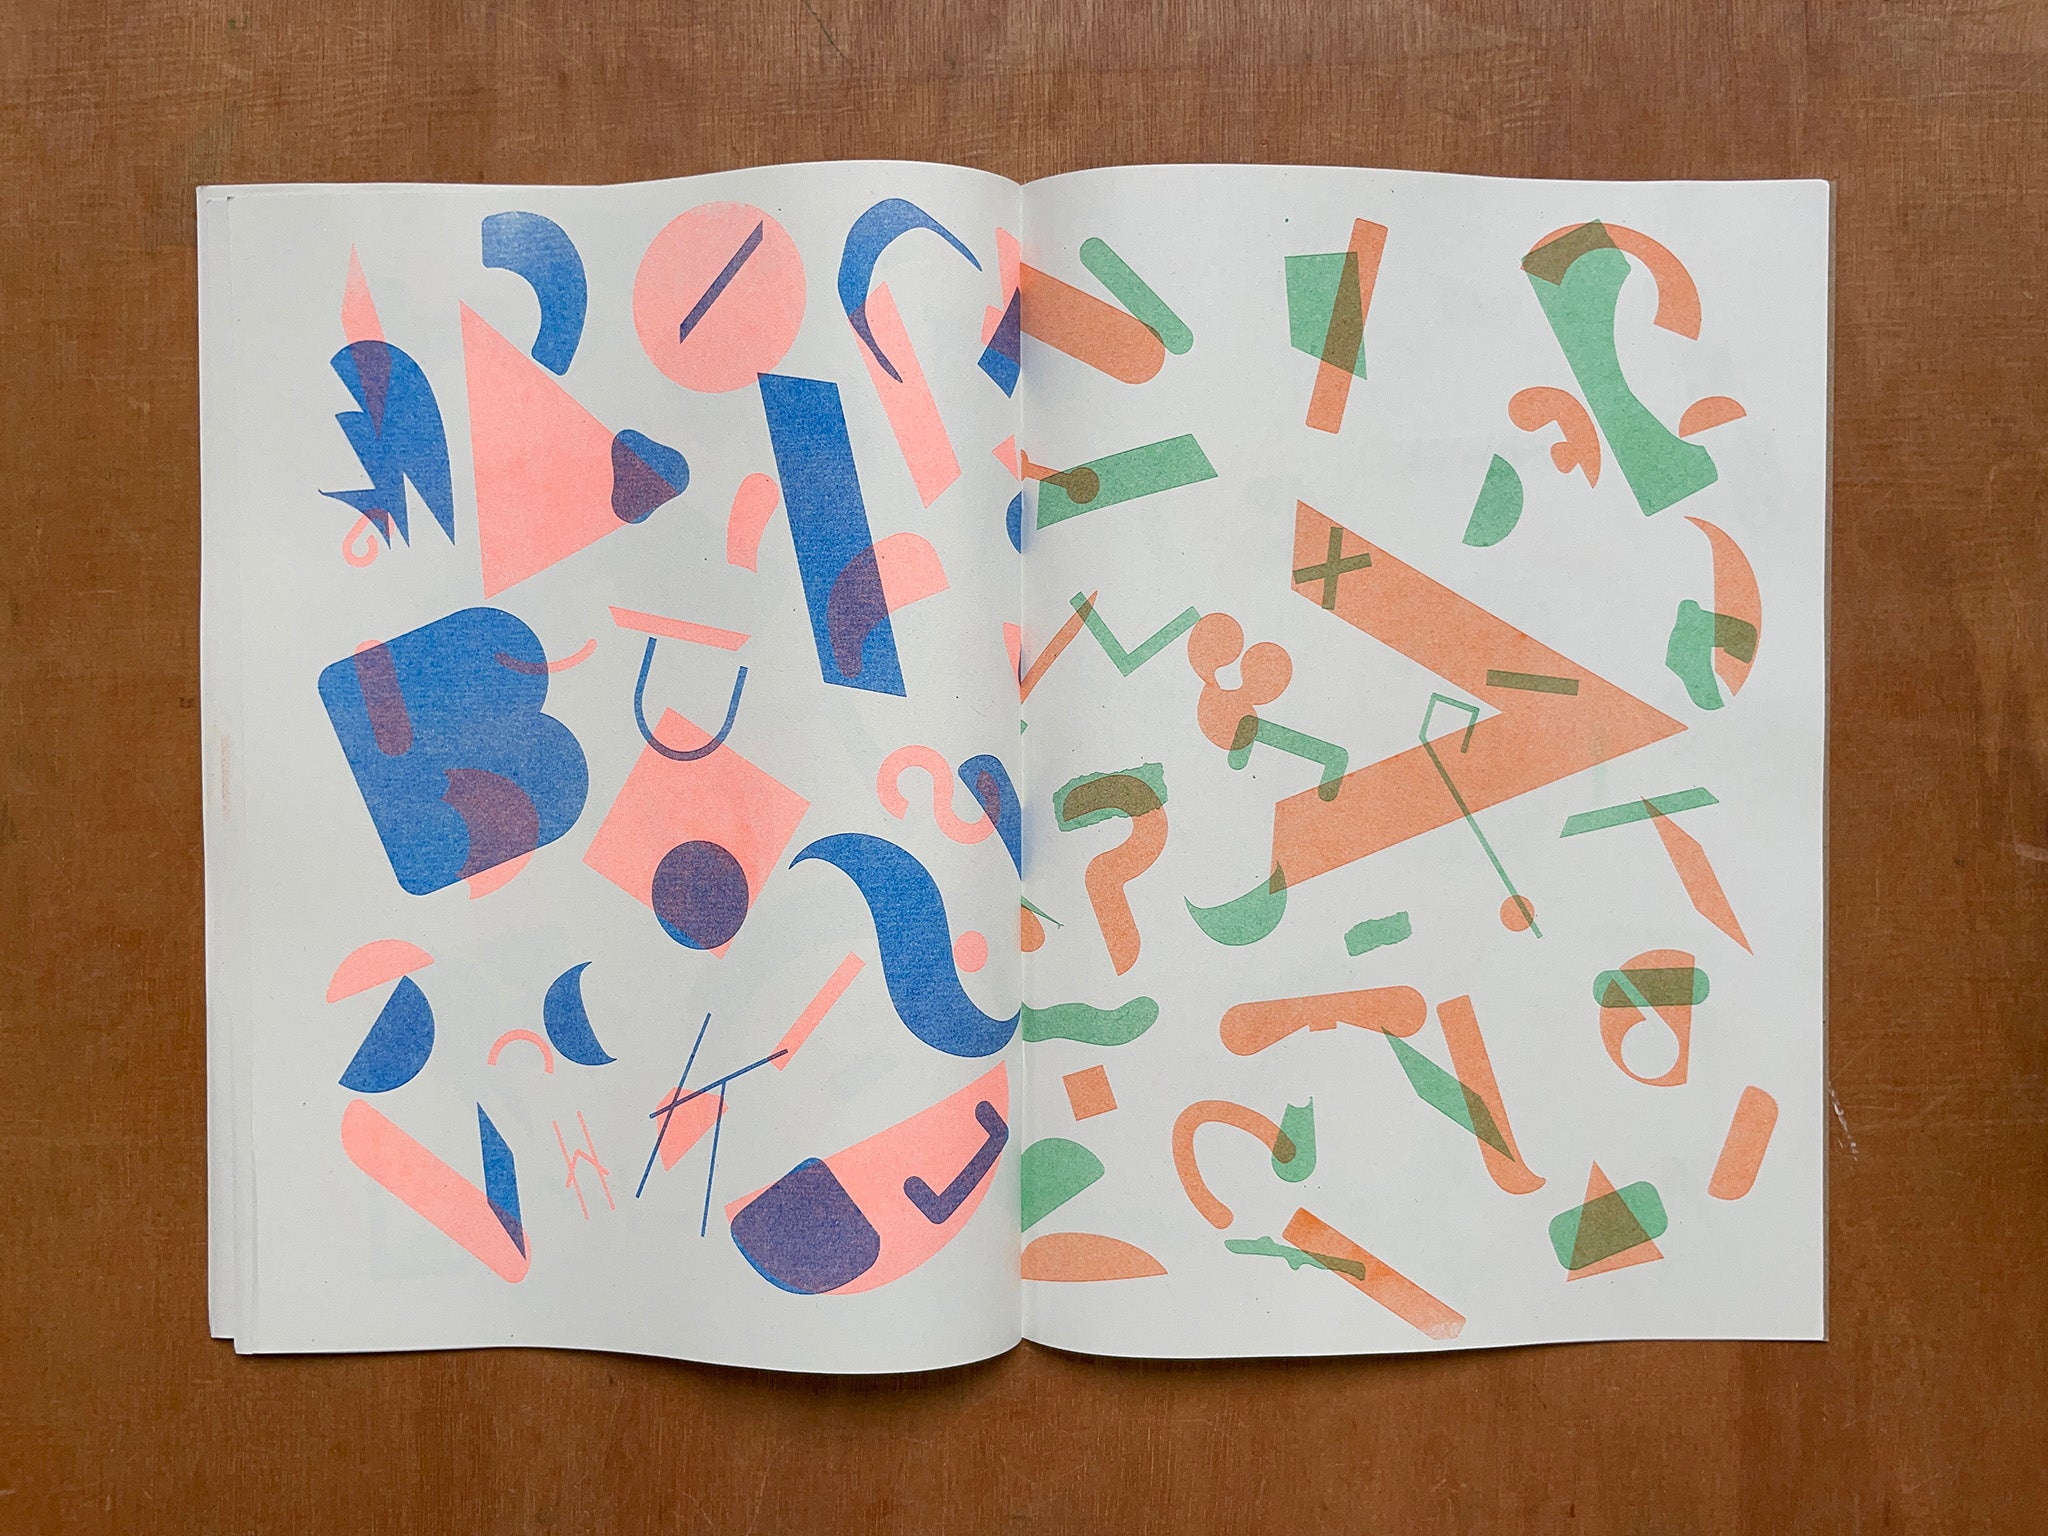 A-Z by Mark Simmonds & Students of BA Graphic Design, University of Lincoln